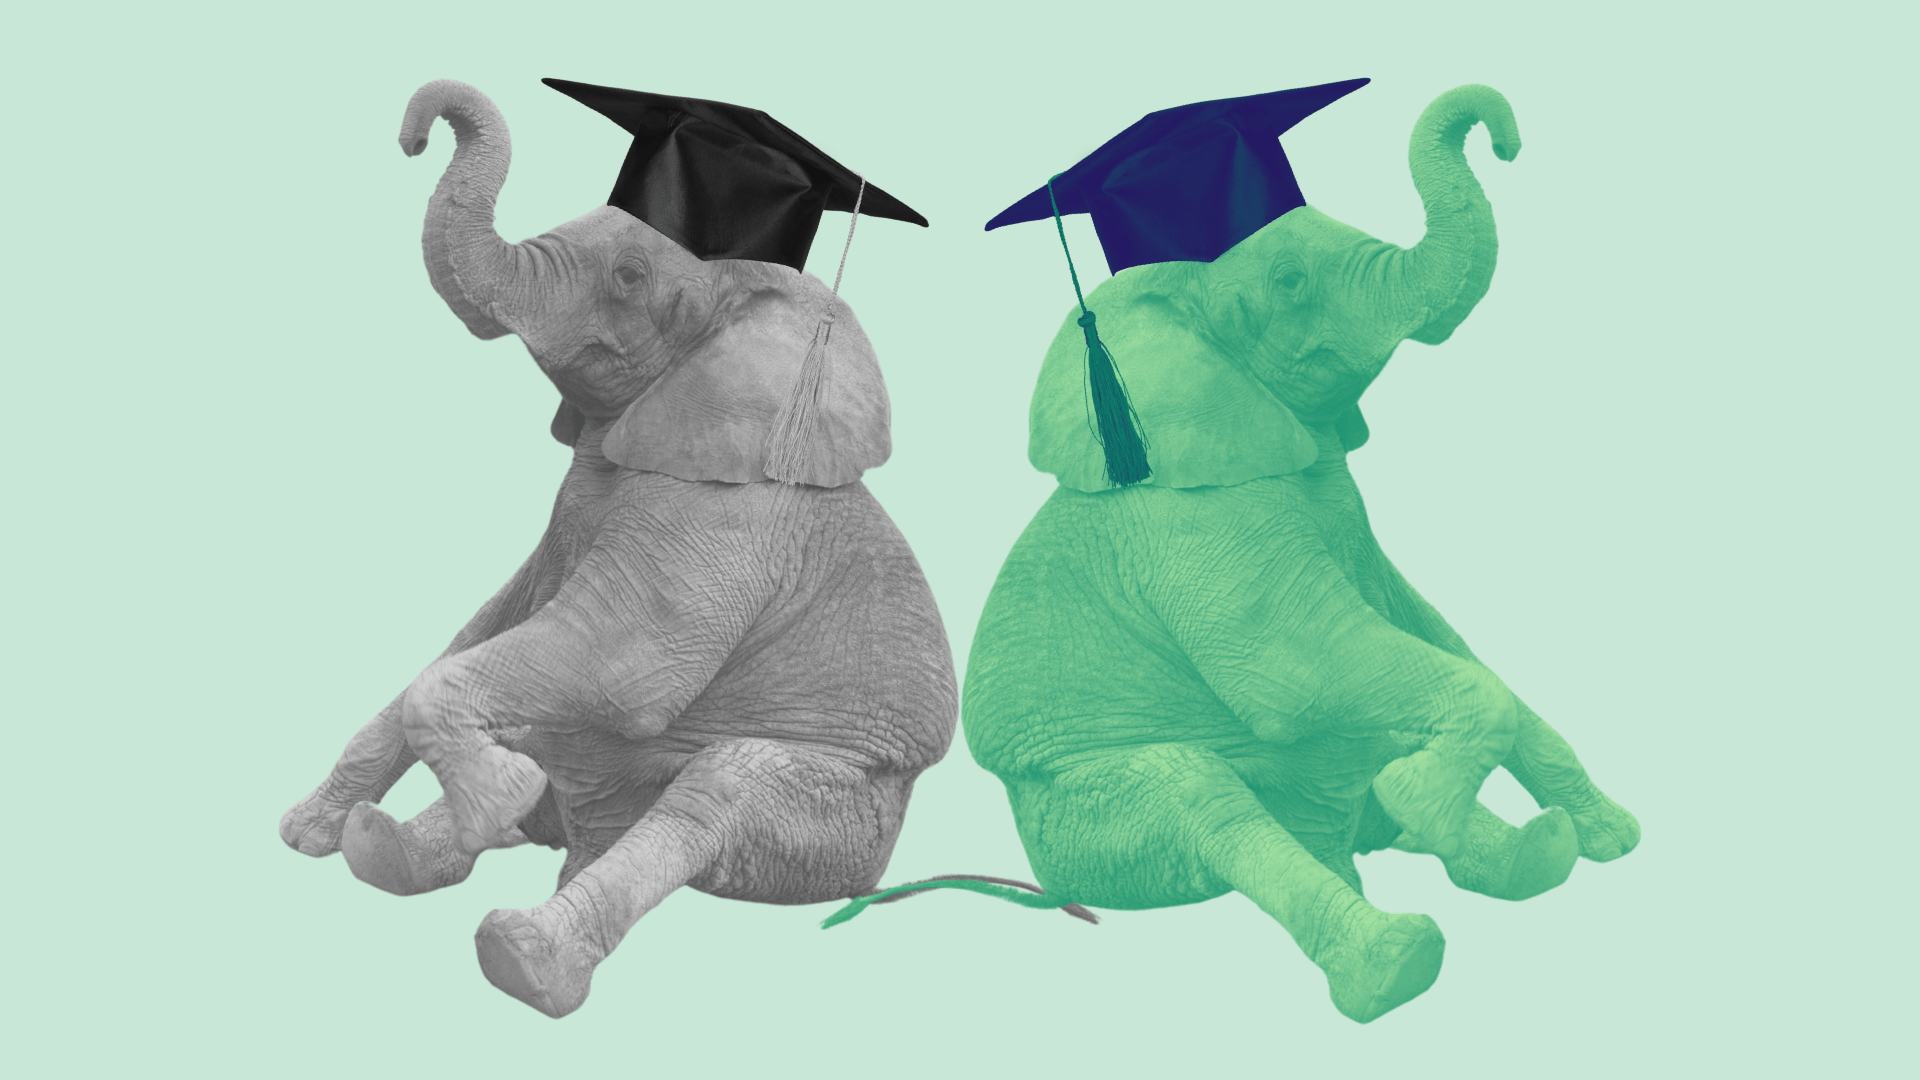 How do we find the green elephant in the classroom?